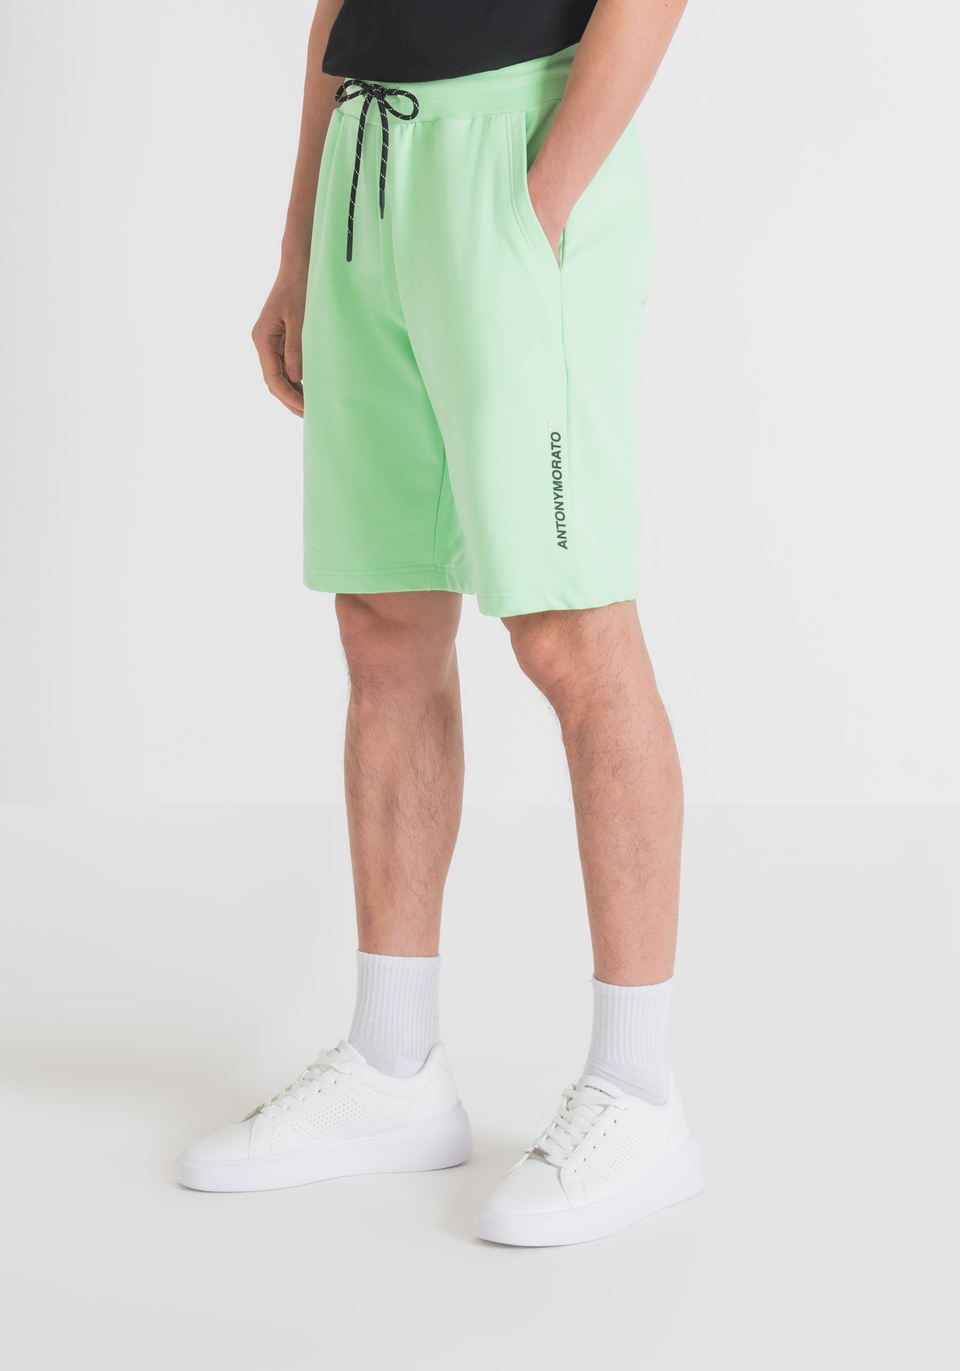 REGULAR FIT SHORTS IN COTTON BLEND AND SUSTAINABLE POLYESTER - Antony Morato Online Shop